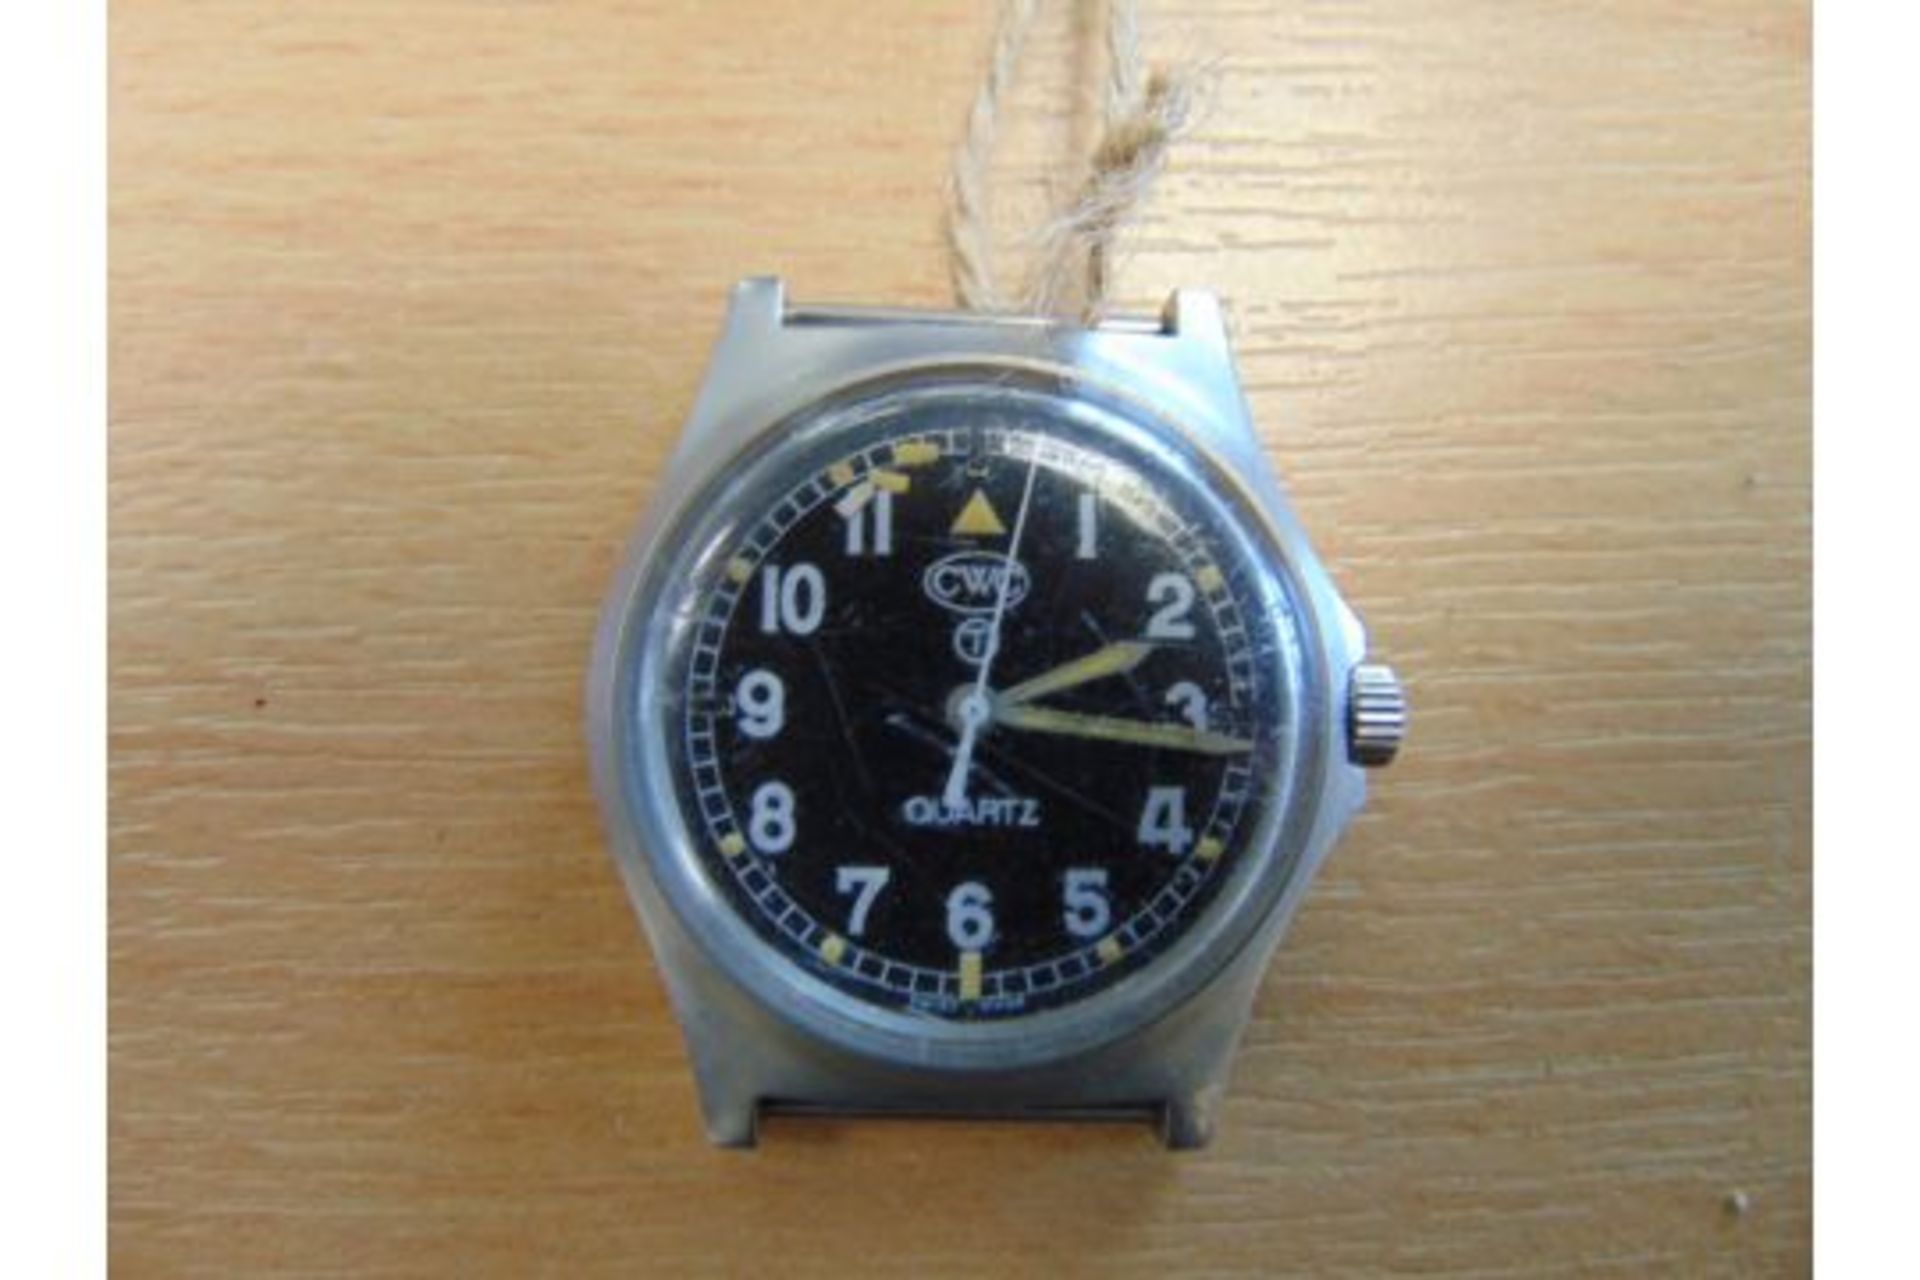 CWC (Cabot Watch Co Switzerland) British Army W10 Service Watch Water Resistant to 5ATM